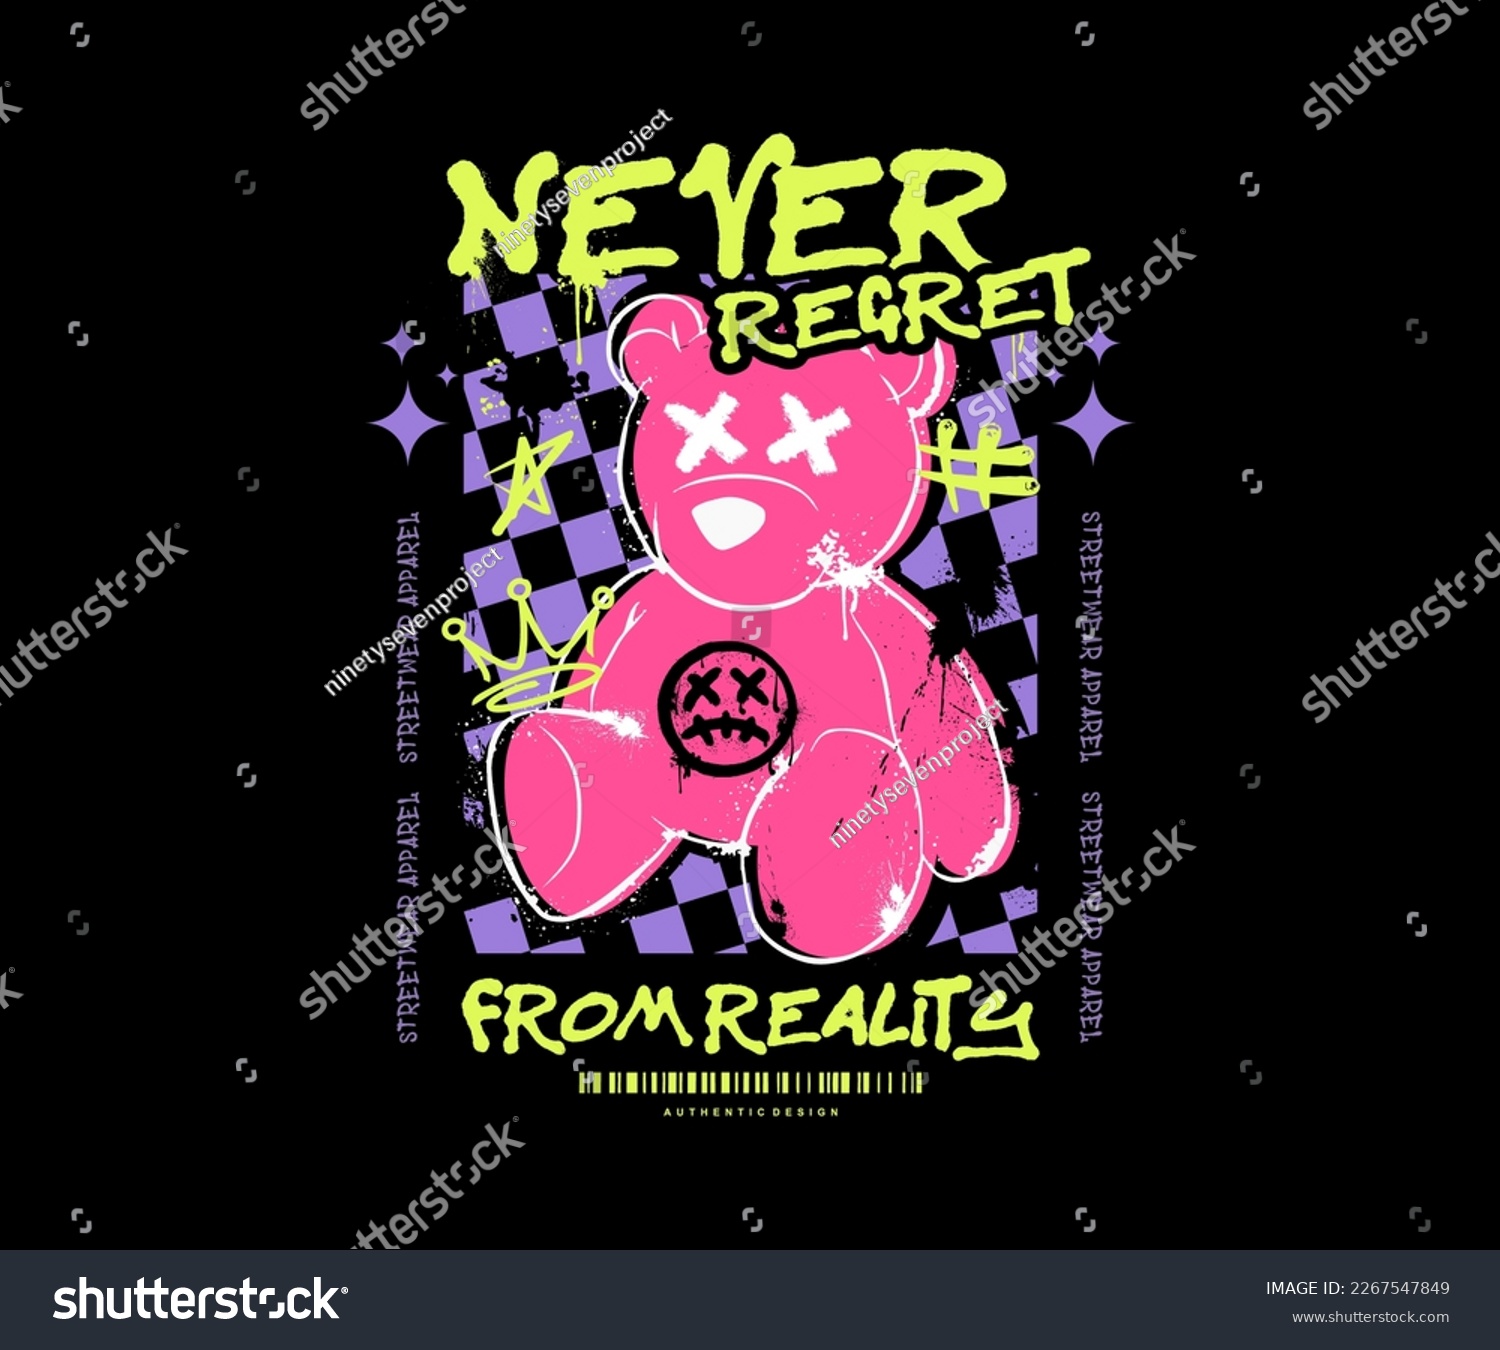 SVG of never regret slogan print design with teddy bear sitting illustration in graffiti street art style, for streetwear and urban style t-shirts design, hoodies, etc. svg